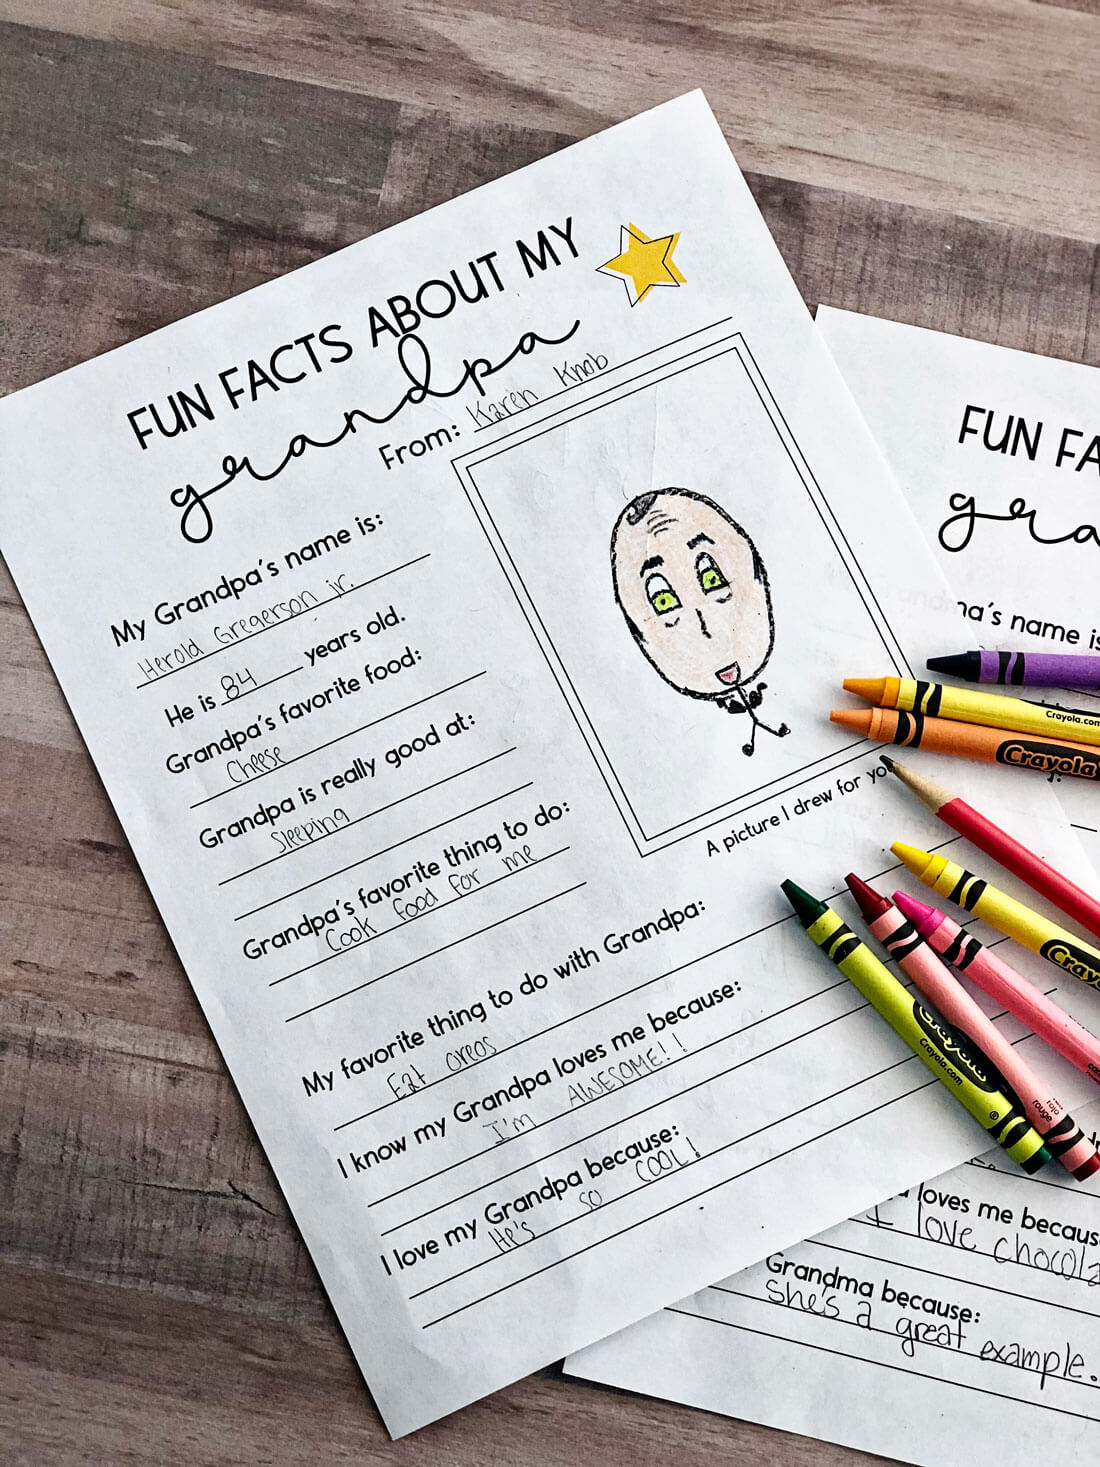 Printables for Grandparents Day - have your kids fill out these fun sheets from www.thirtyhandmadedays.com